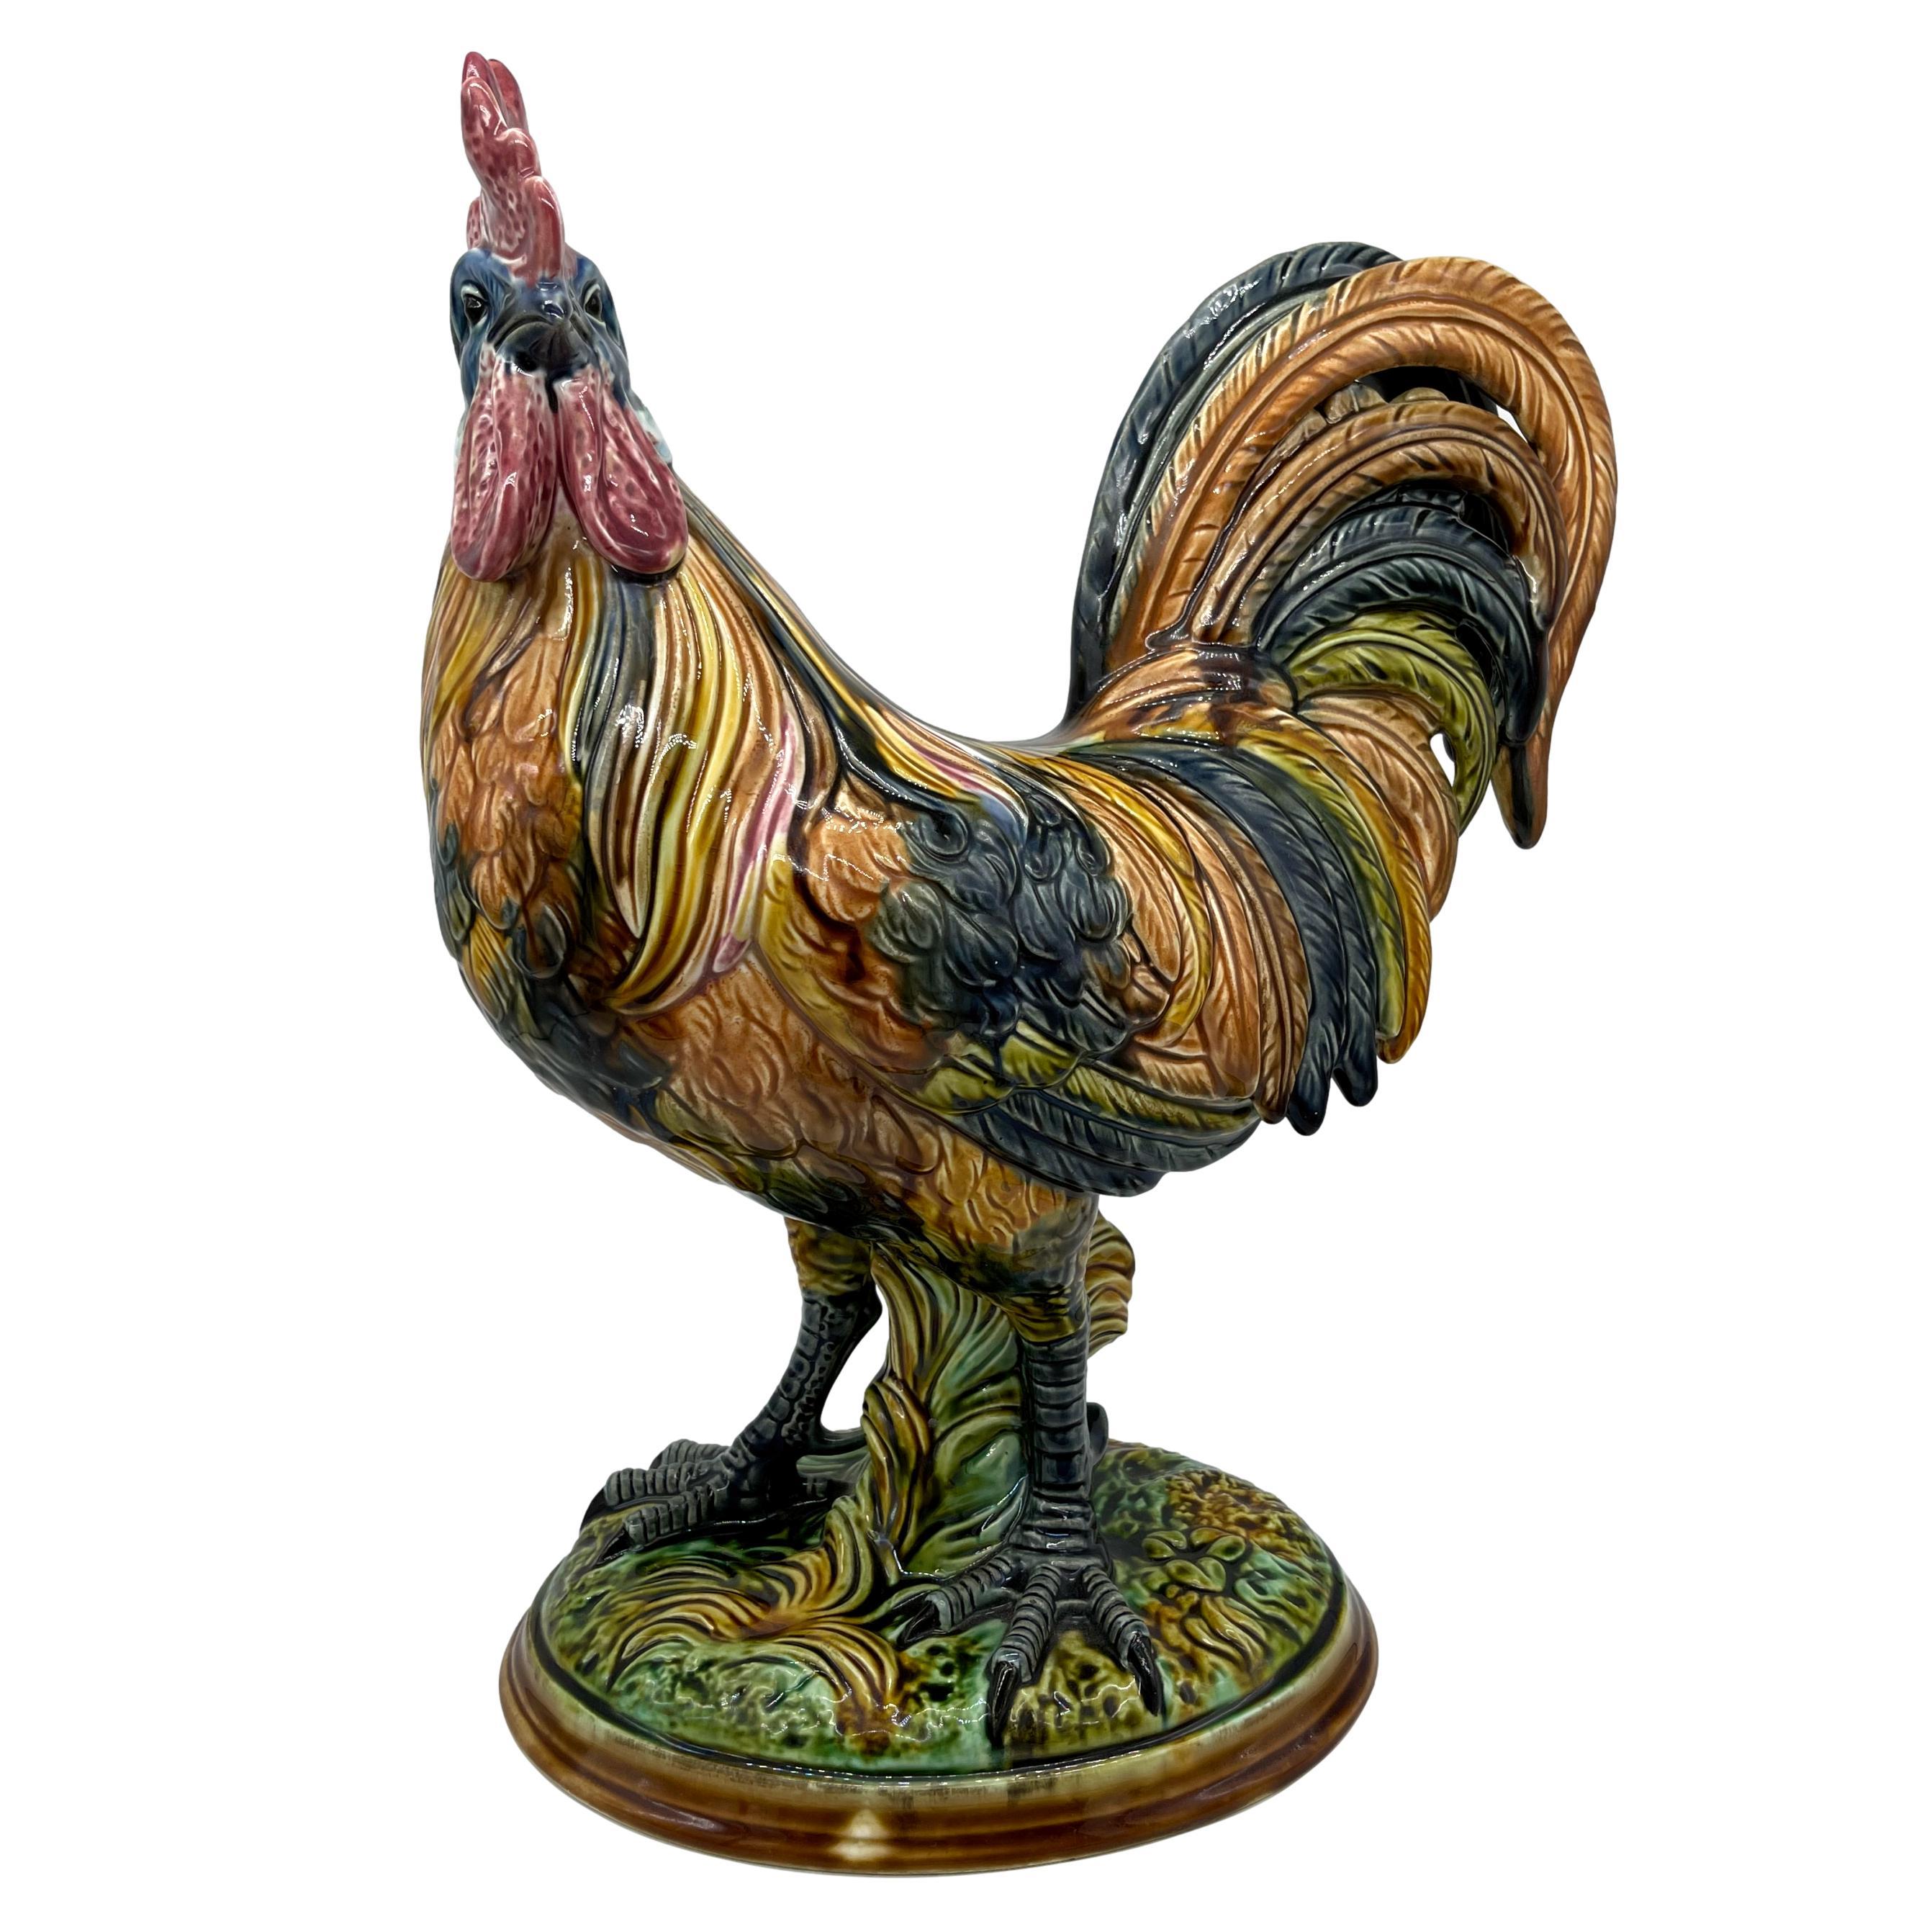 Majolica Figural Rooster, naturalistically modeled as an alert cockerel, the feathers with mottled gold, brown and blue glazes, the comb and wattle glazed in pink and red, on an oval pedestal base, the reverse with painted mark: Steingutfabrik D.&F.